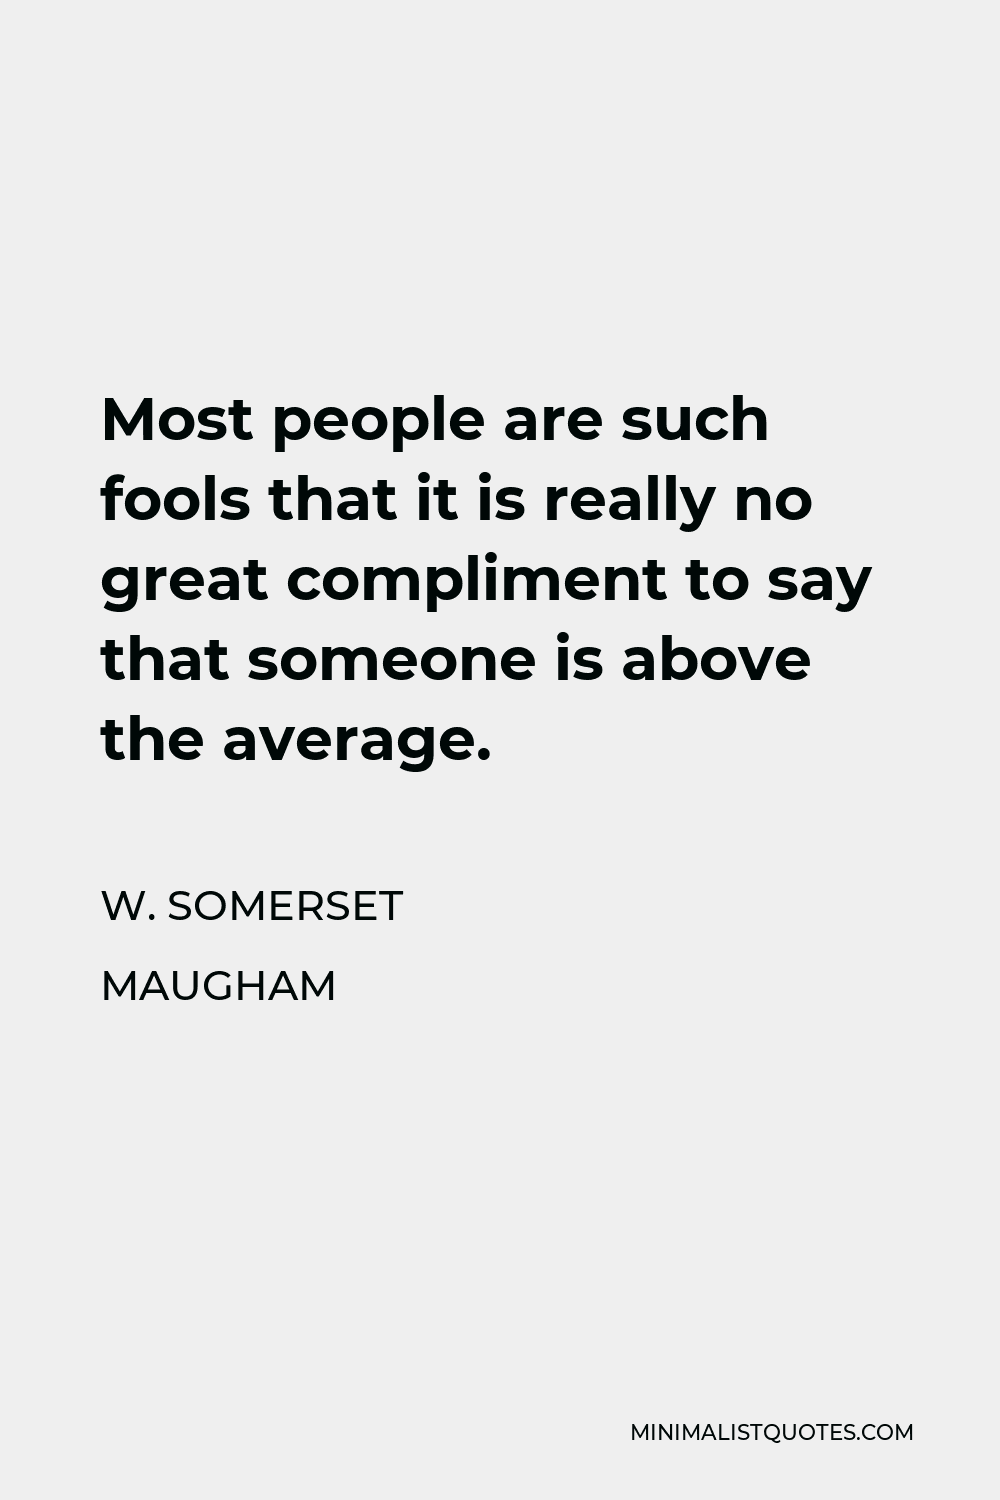 W. Somerset Maugham Quote - Most people are such fools that it is really no great compliment to say that someone is above the average.